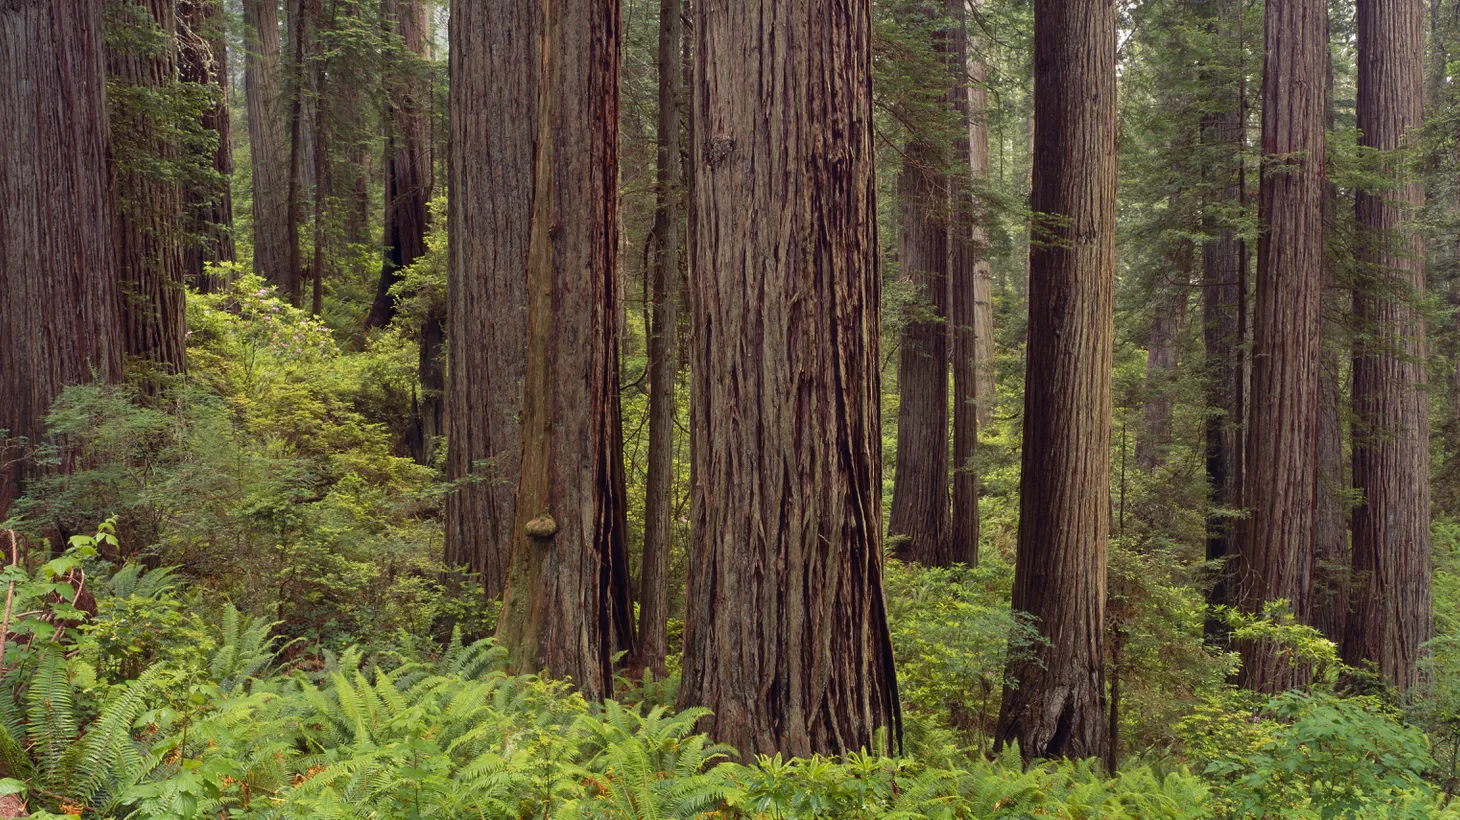 California’s Jedediah Smith Redwood State Park is home to old-growth redwoods.